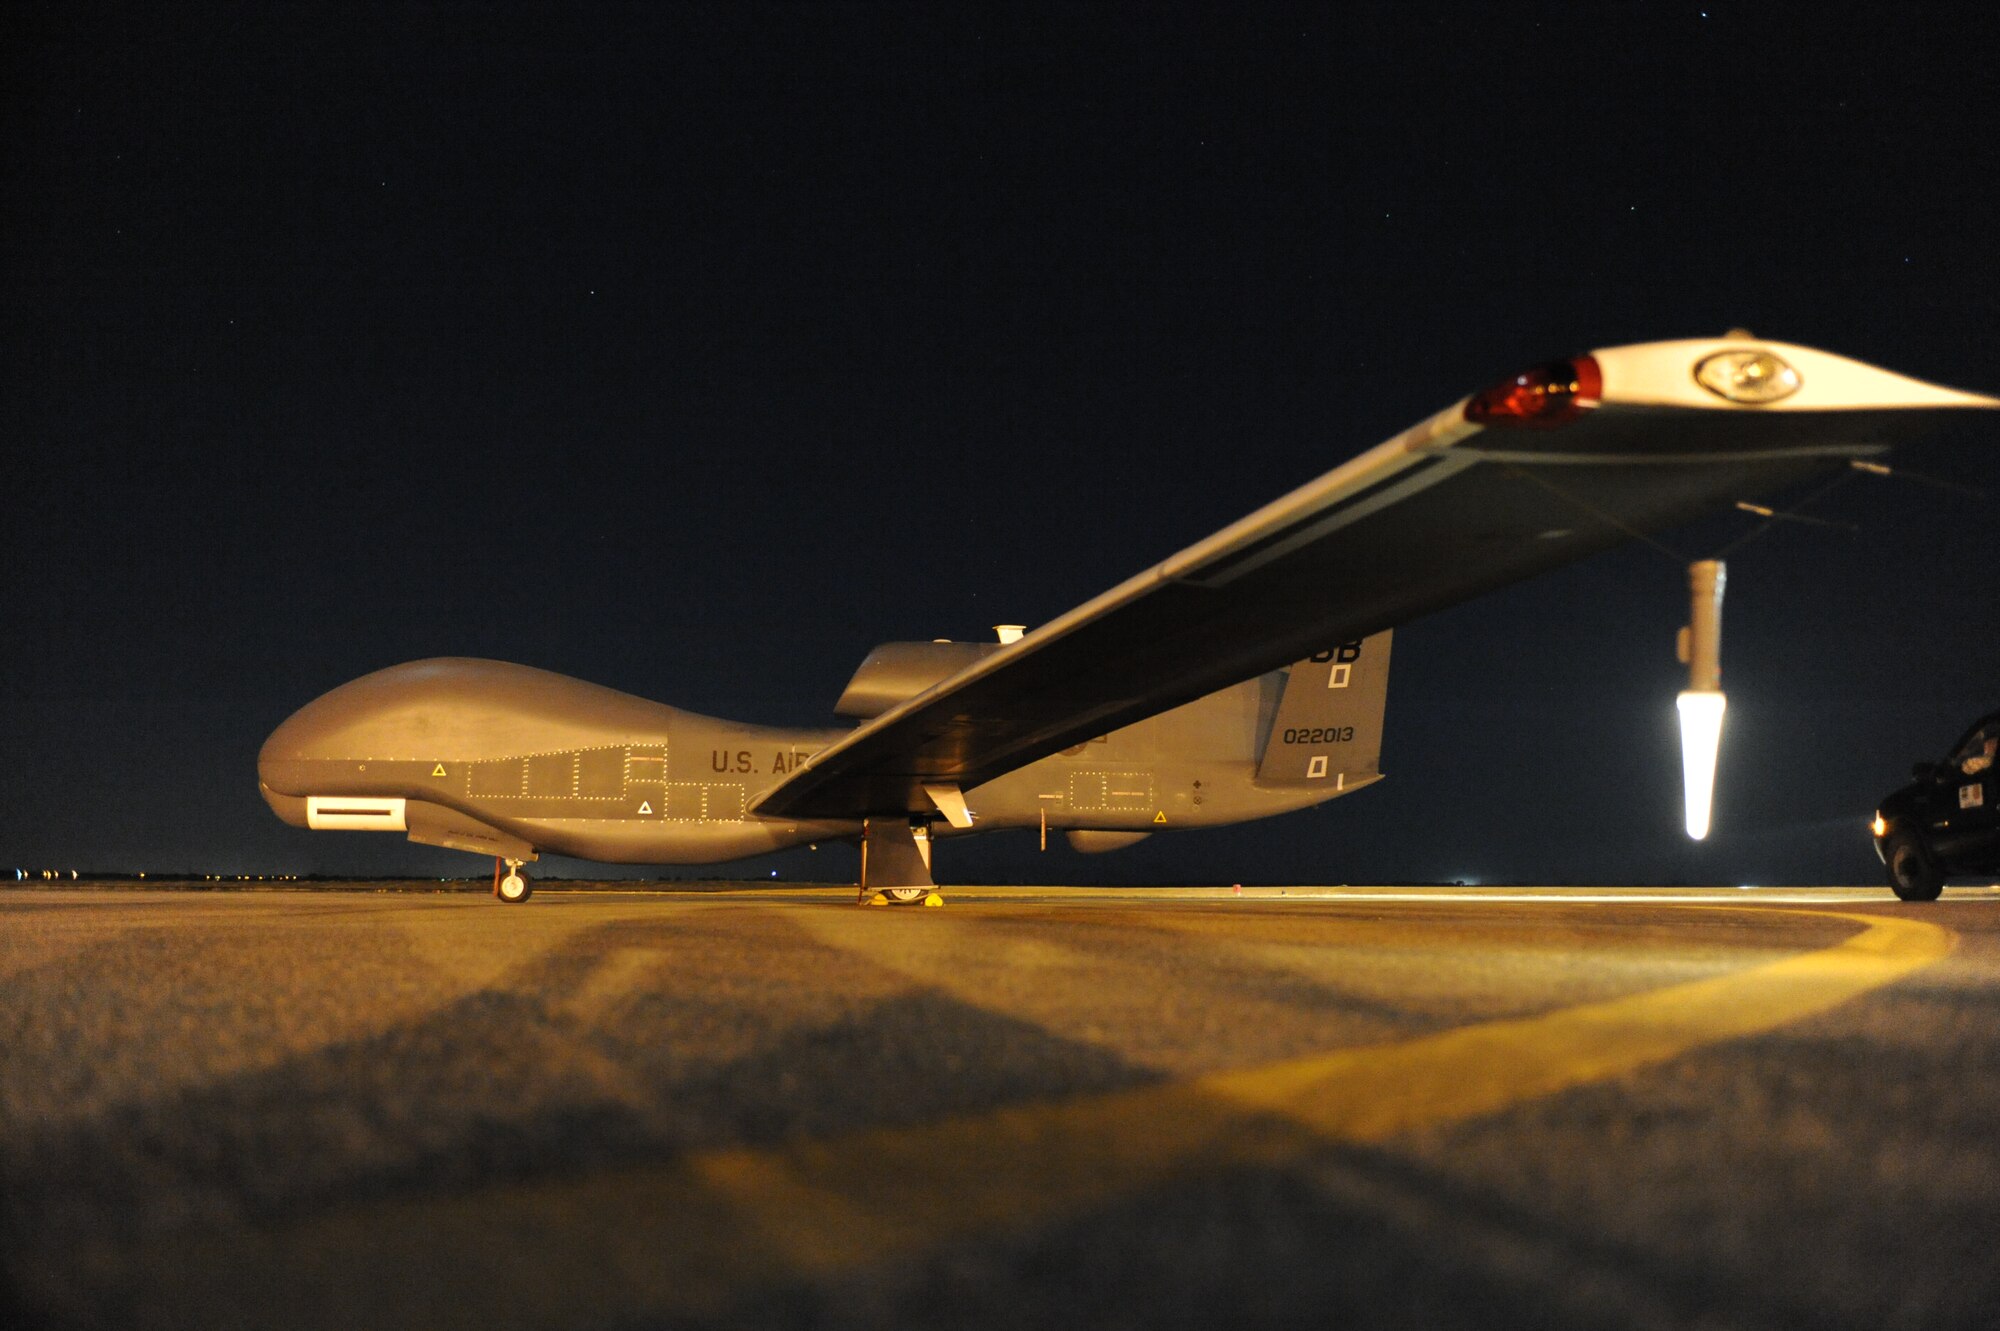 A Global Hawk sits on the runway before beginning a nighttime mission. The aircraft is unmanned, and is used to capture imagery from high-altitudes. (Photo by John Schwab)